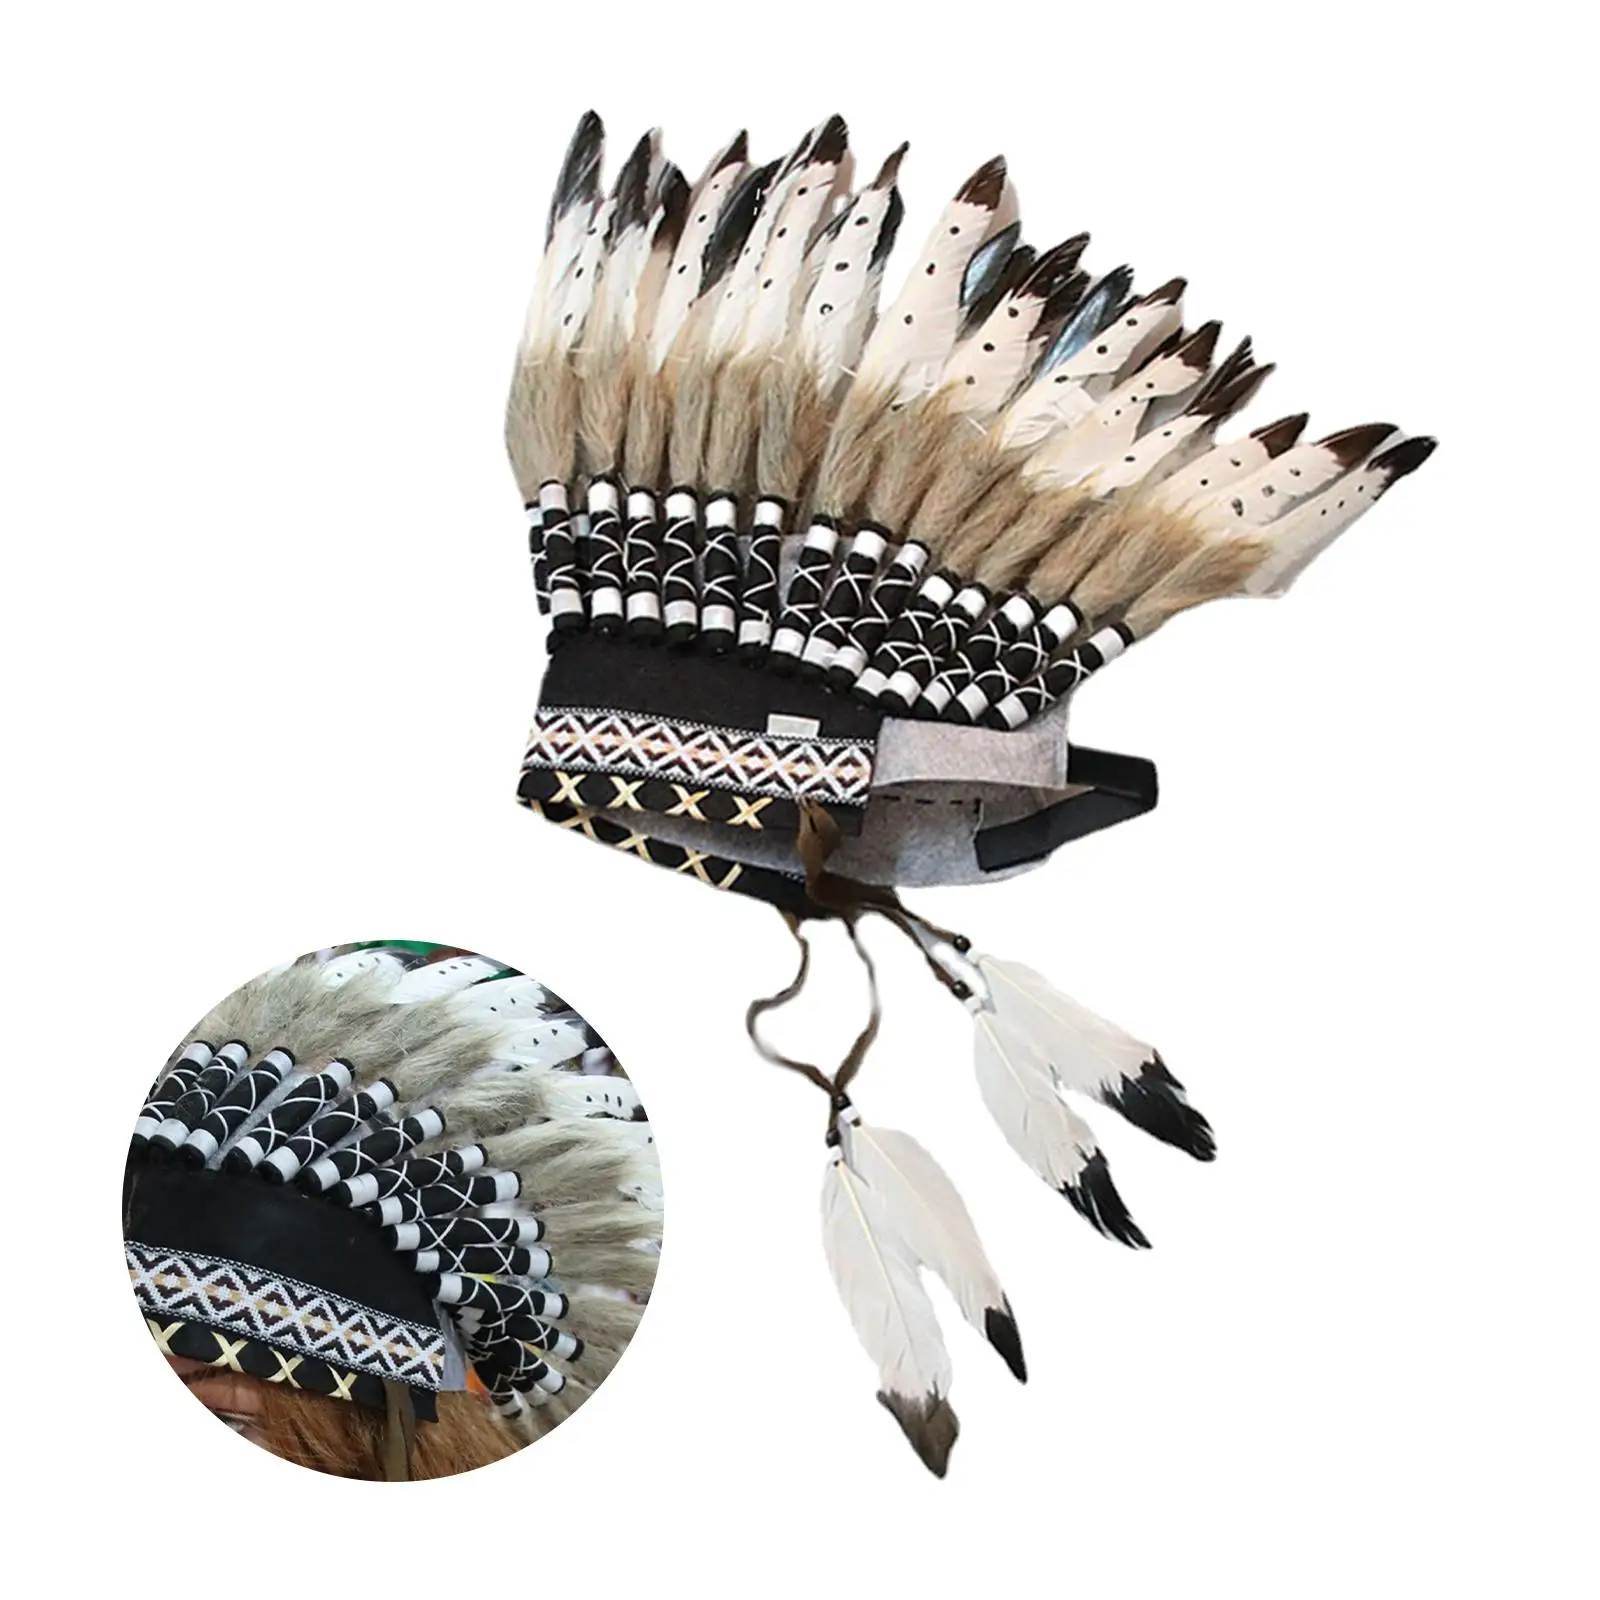 

Indian Hat Feather Headdress Decorative Men Women Accessory Head Accessories for Stage Halloween Party Fancy Dress Masquerade